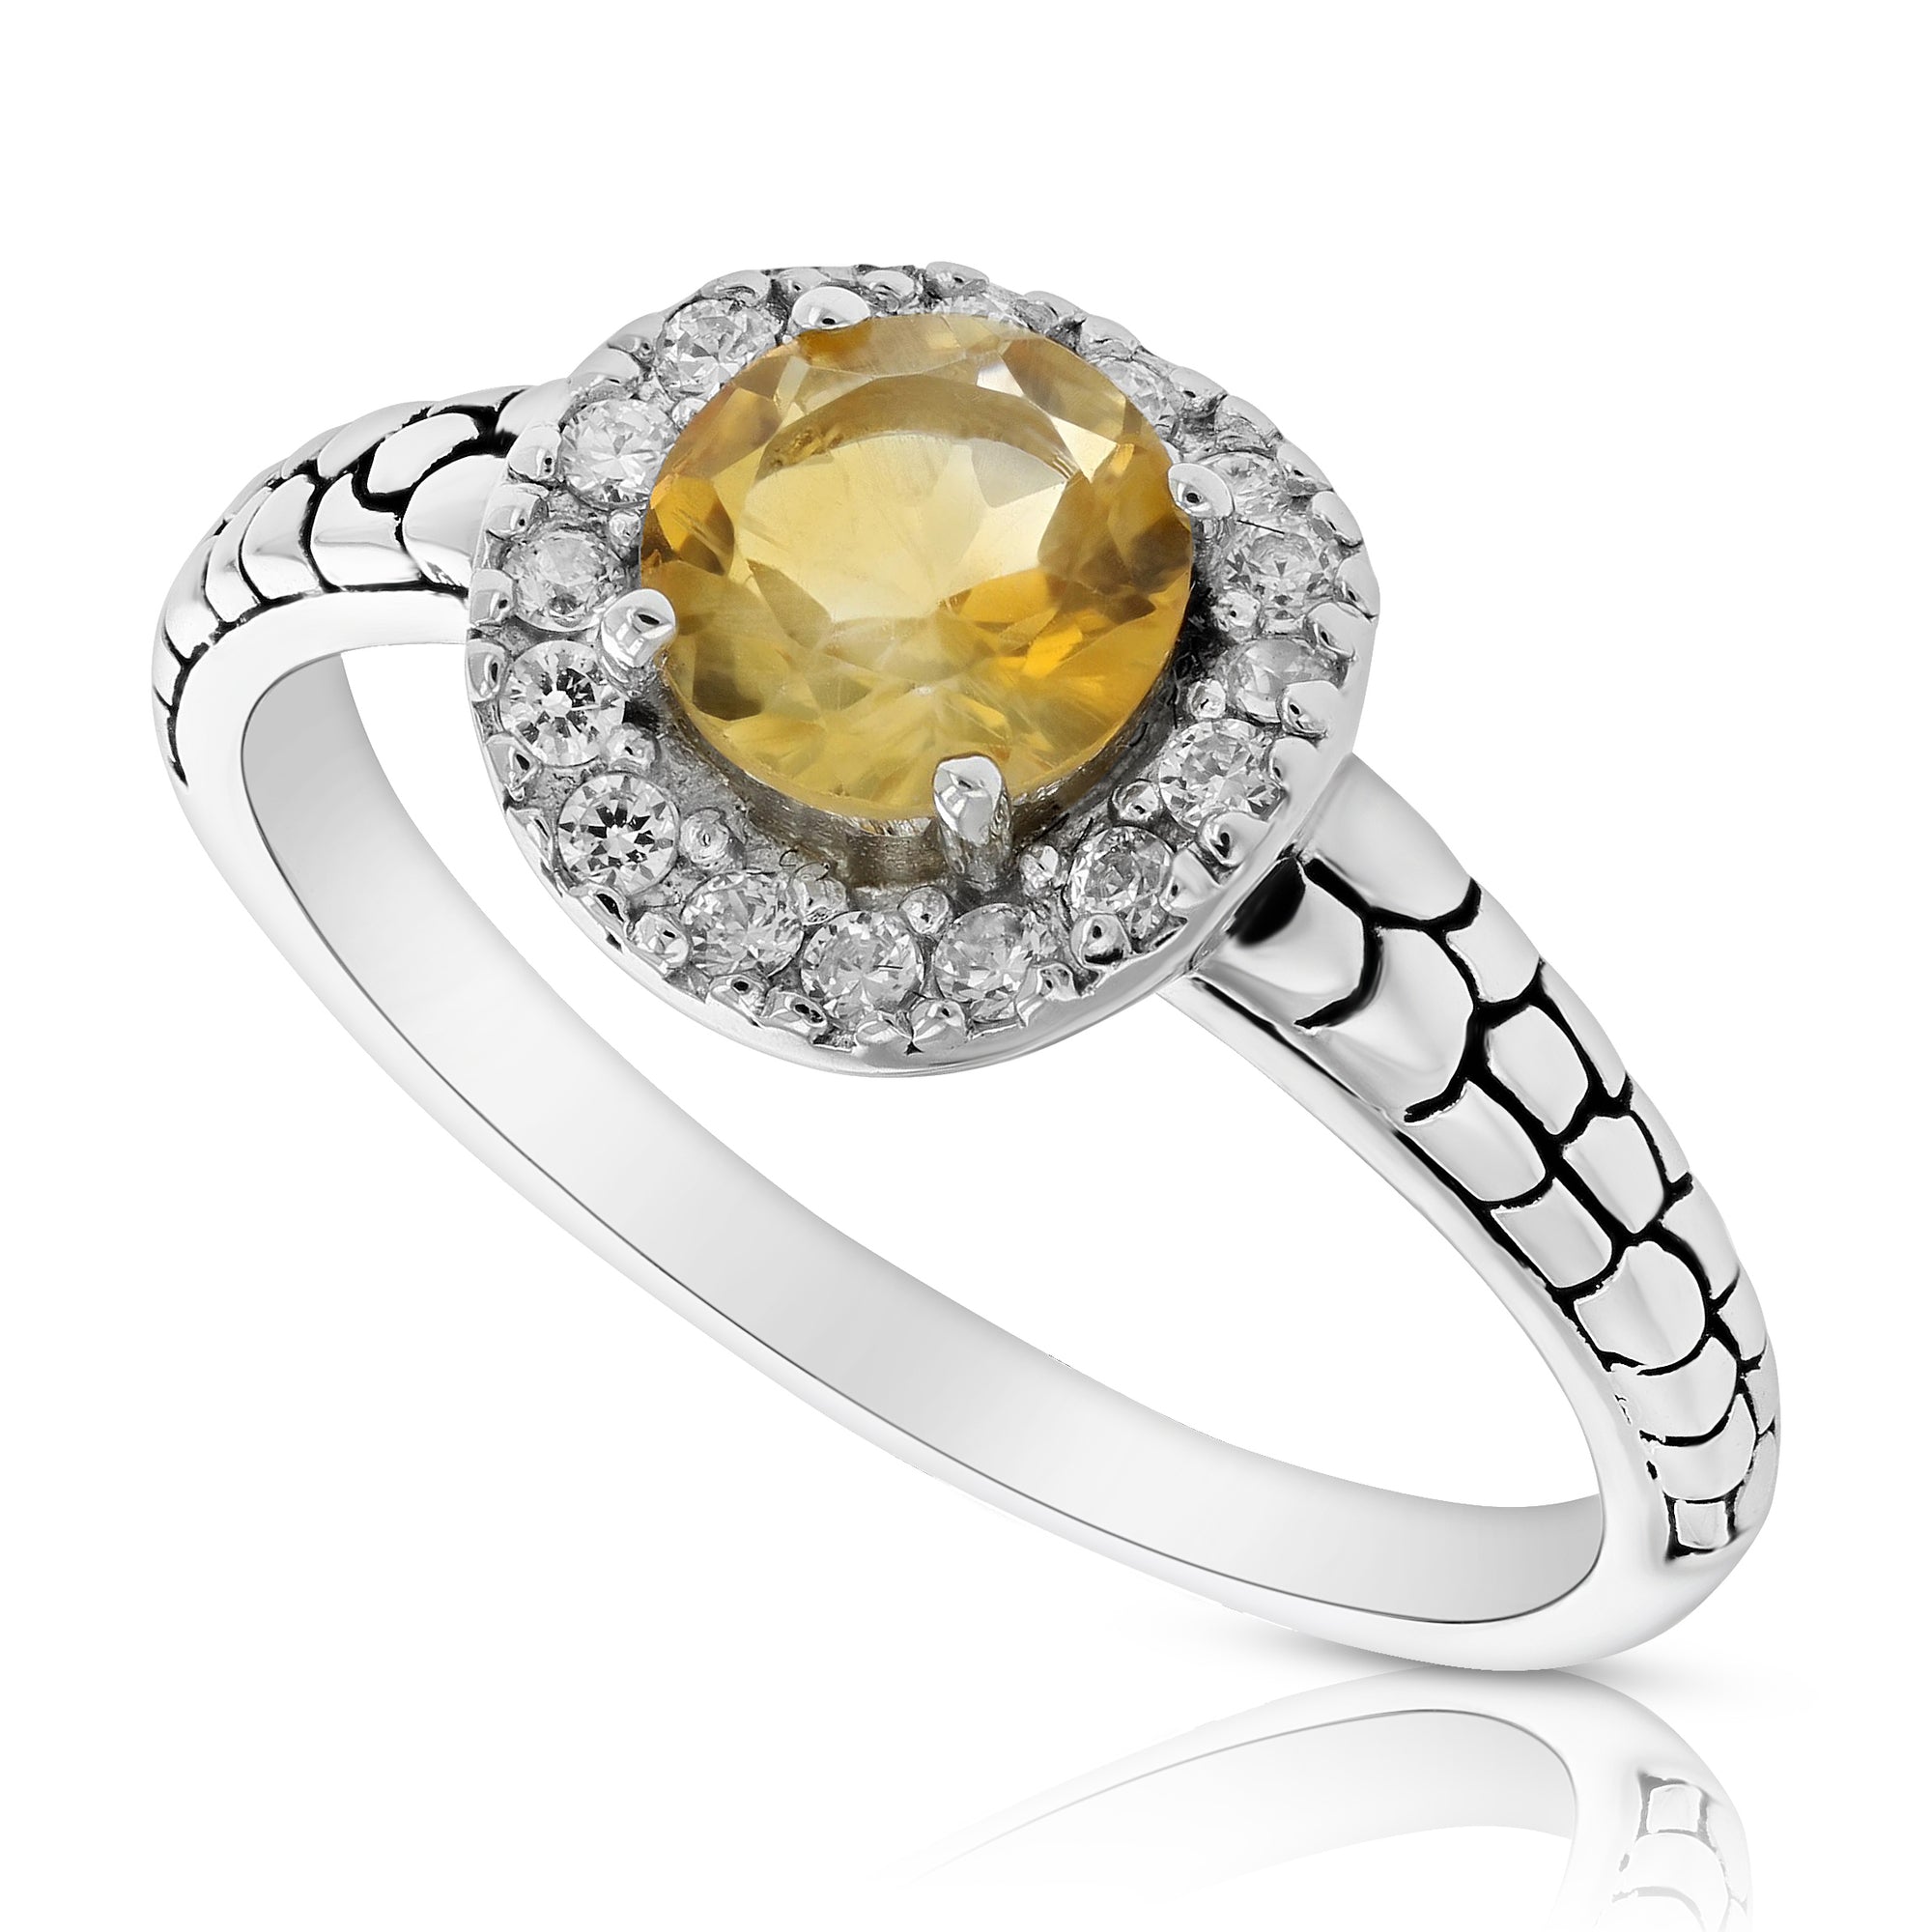 0.65 cttw Citrine Ring in .925 Sterling Silver Rhodium Plating Round 10x8 MM